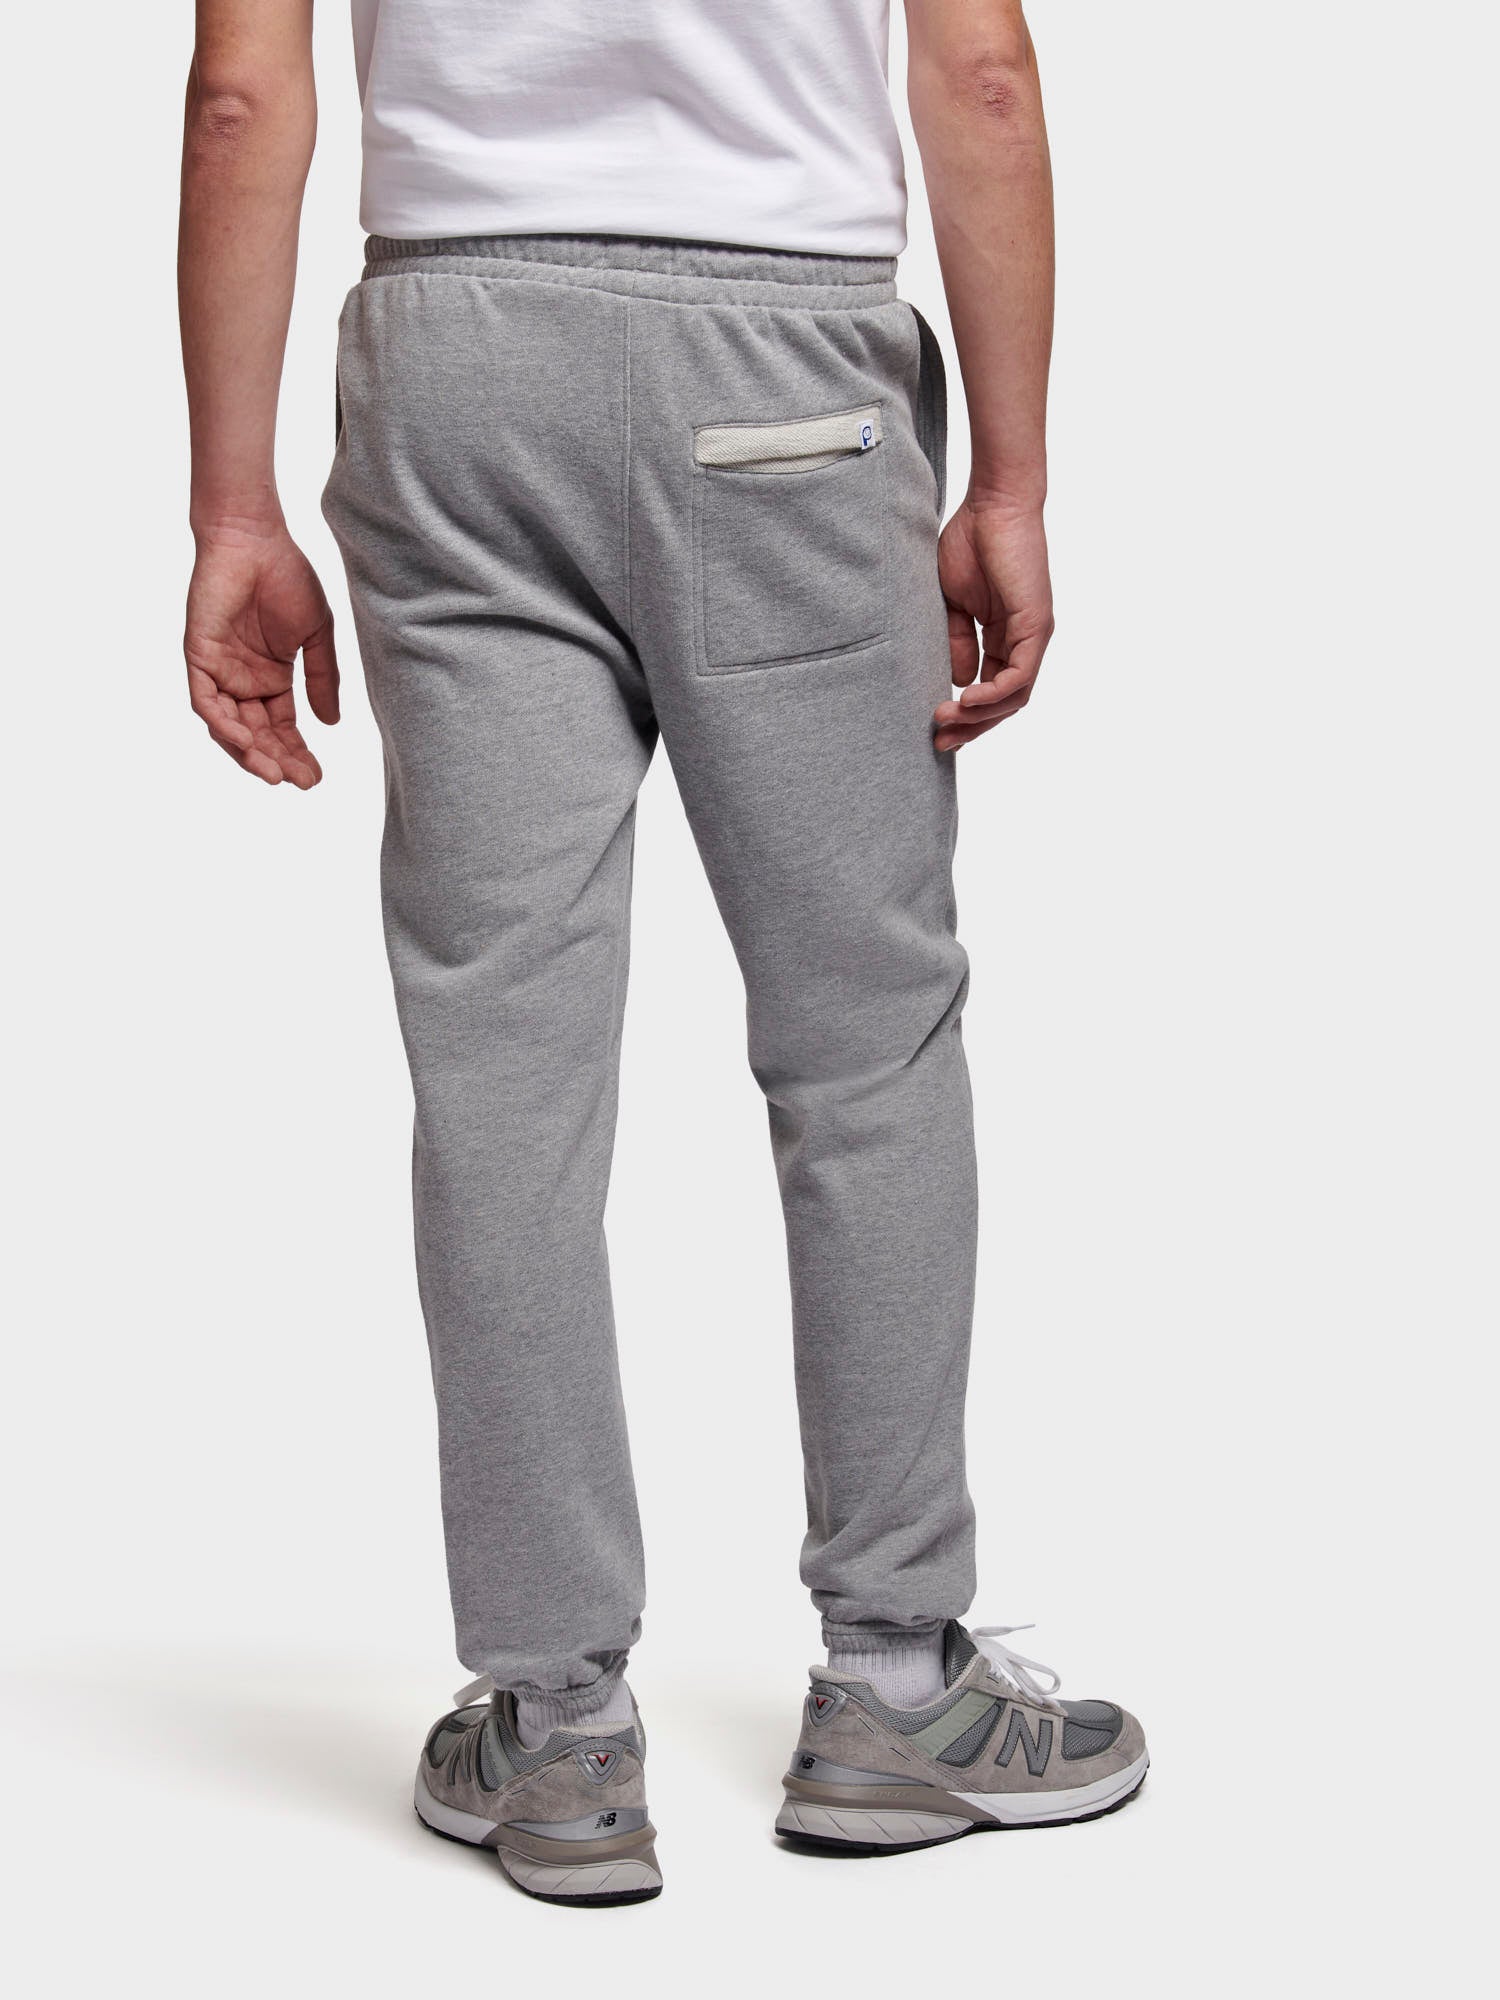 Relaxed Fit Original Logo Joggers in Athletic Grey Heather